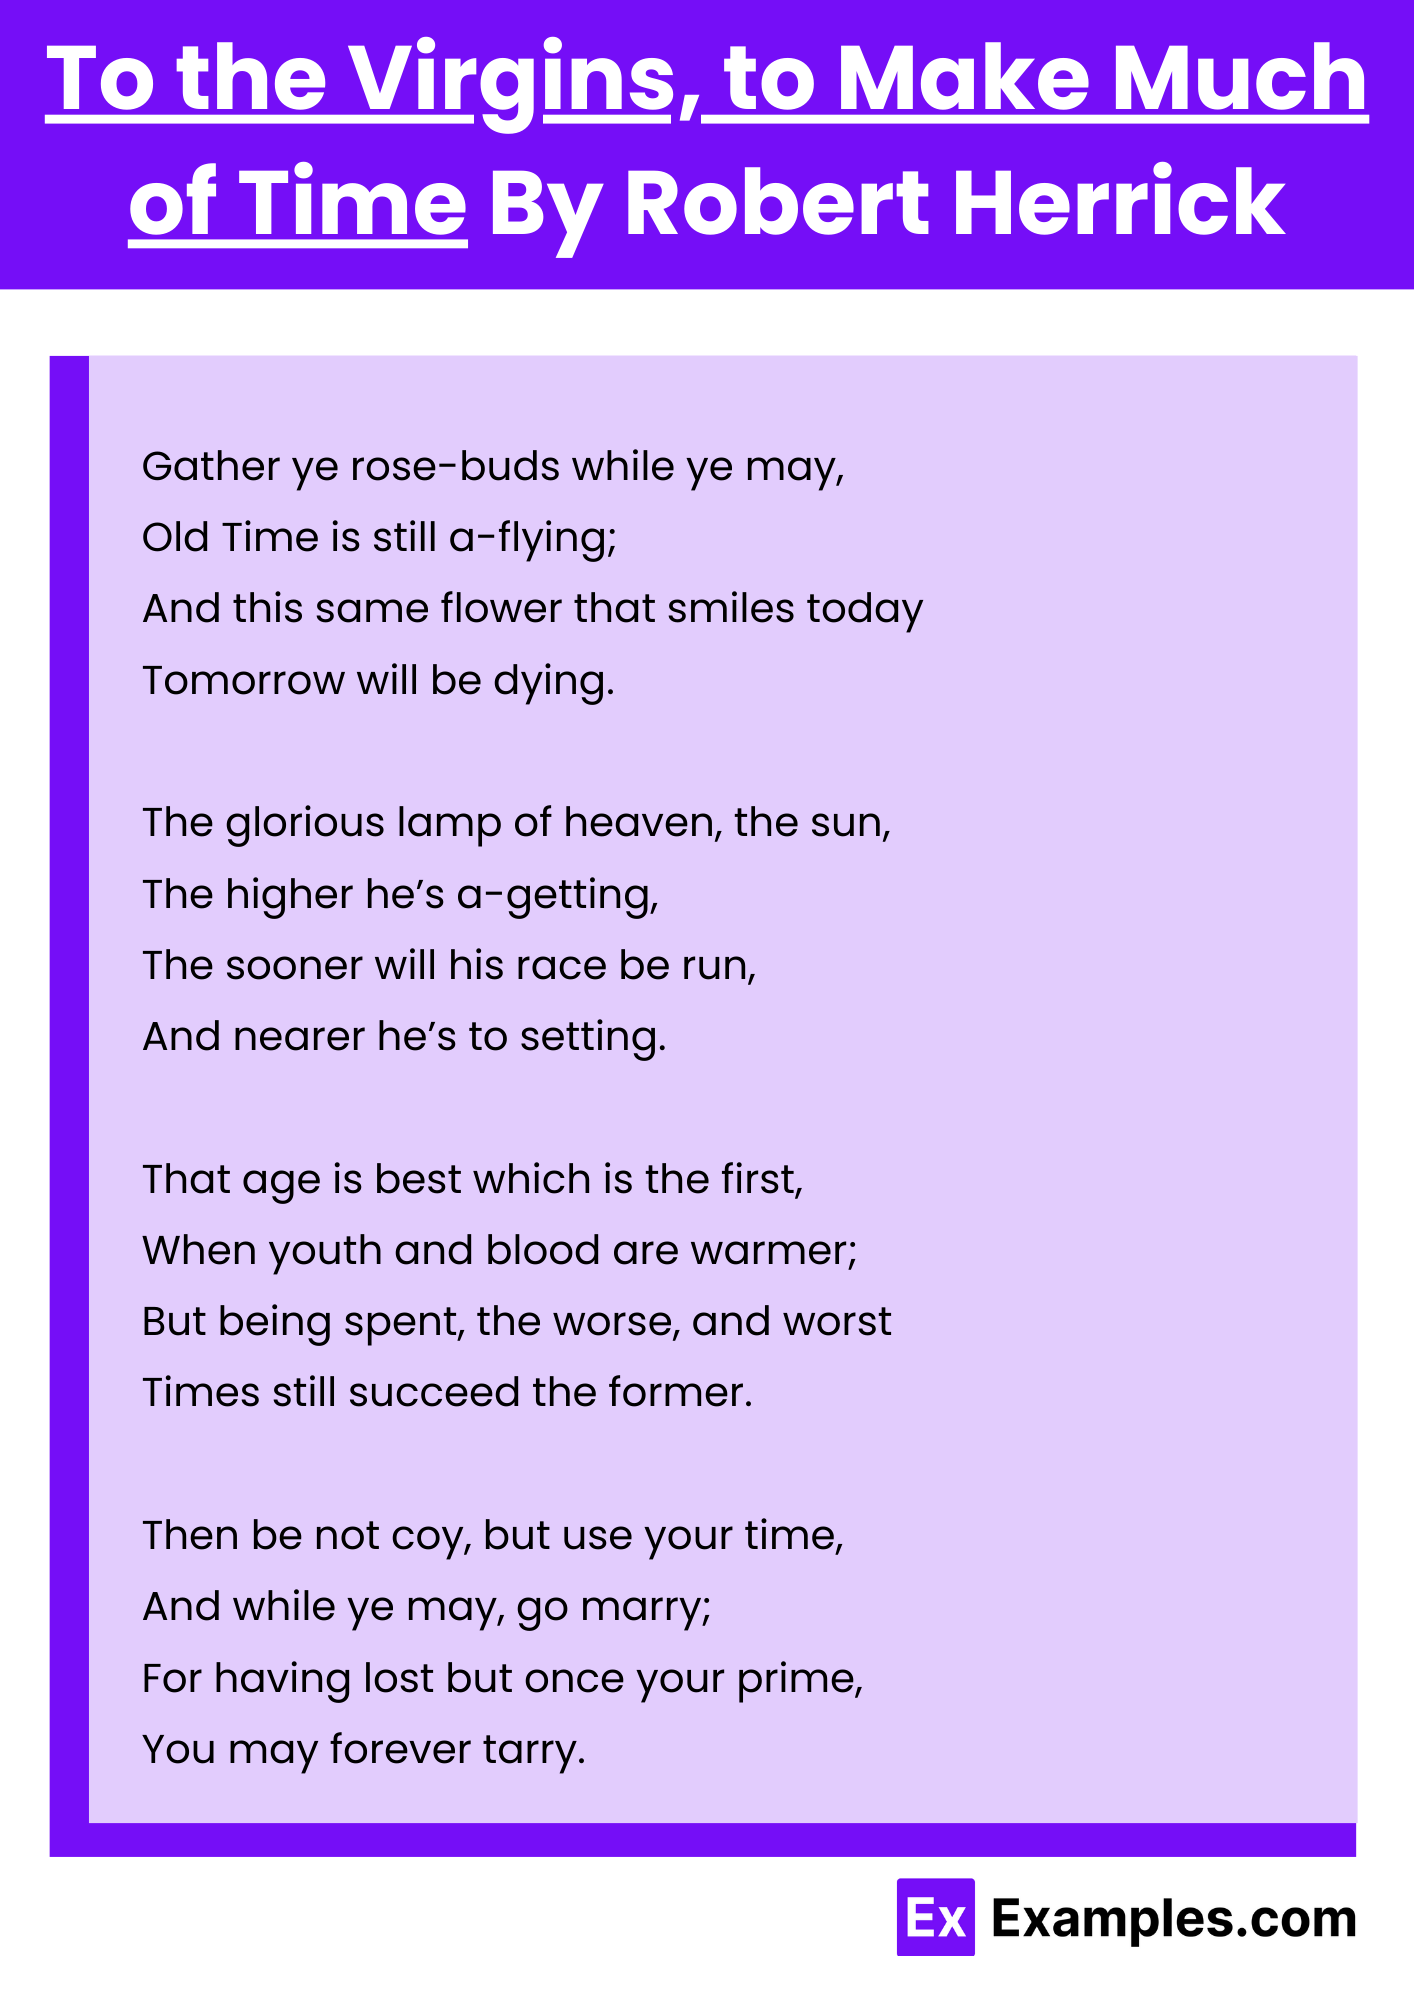 To the Virgins, to Make Much of Time By Robert Herrick